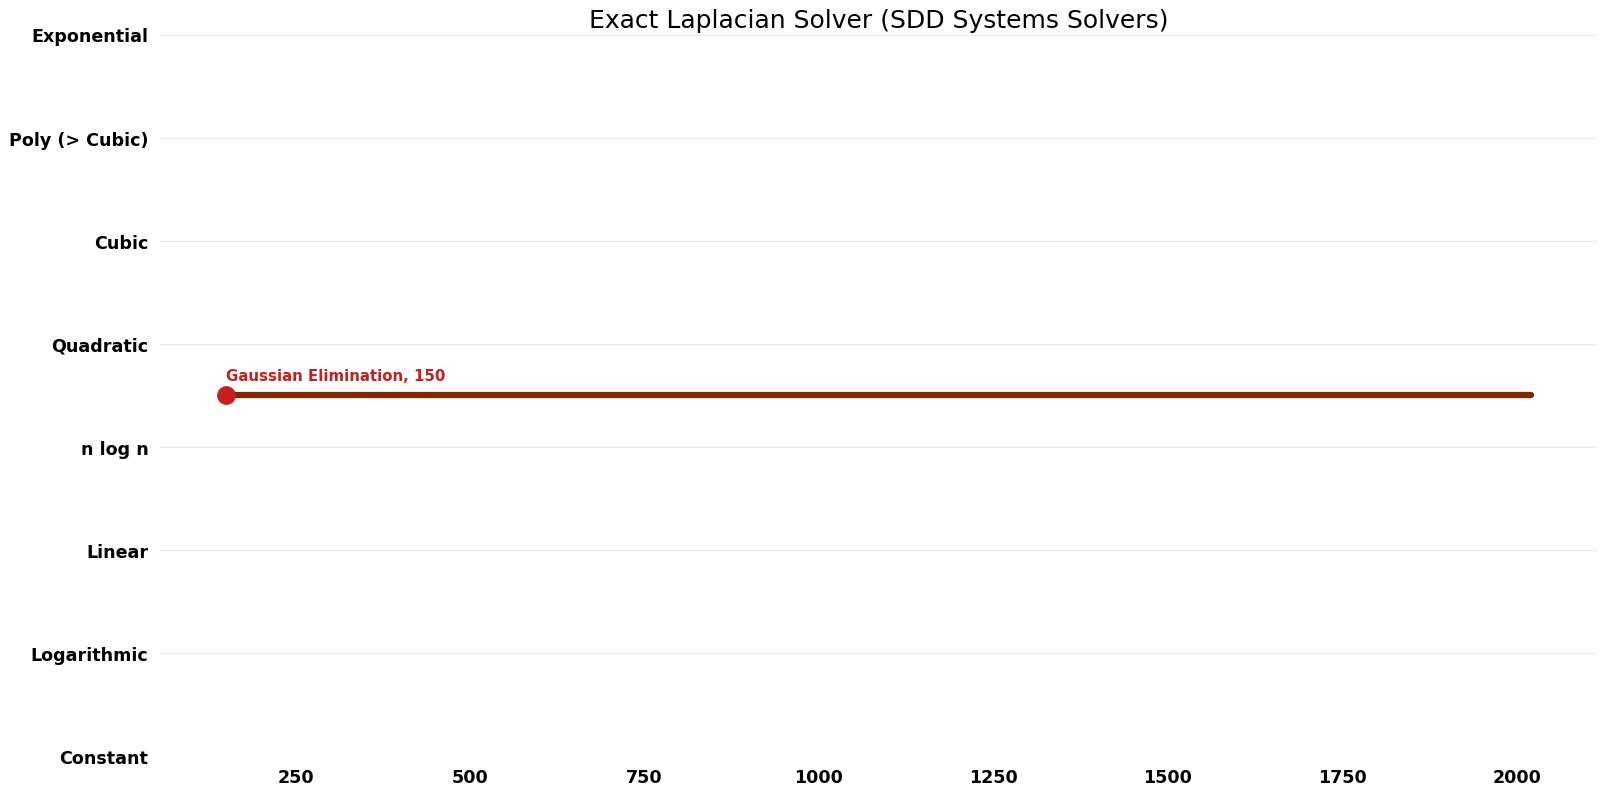 File:SDD Systems Solvers - Exact Laplacian Solver - Time.png